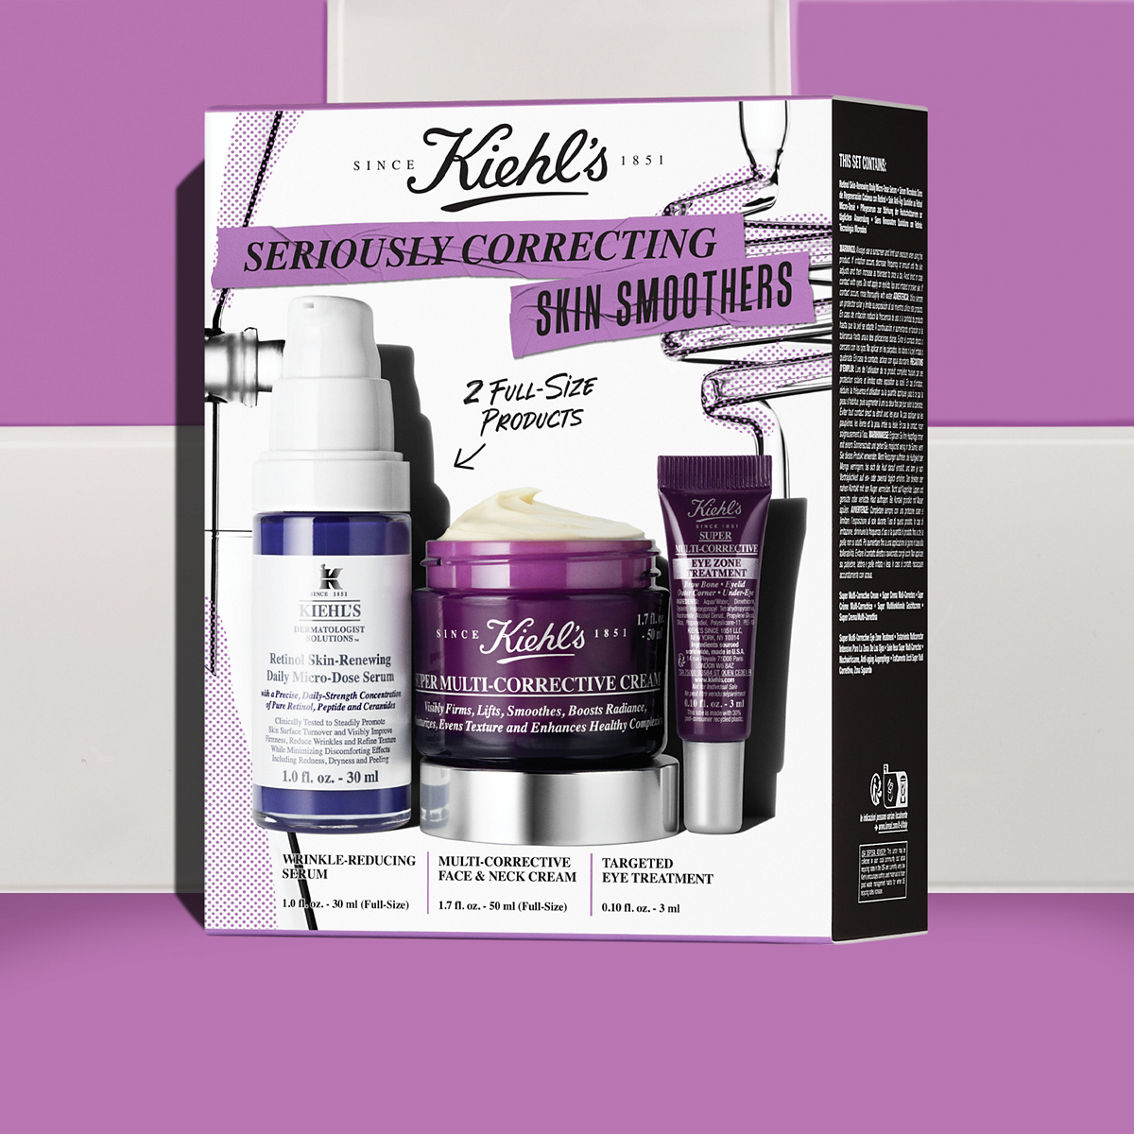 Kiehl's Seriously Correcting Skin Smoothers Gift Set - Image 2 of 4